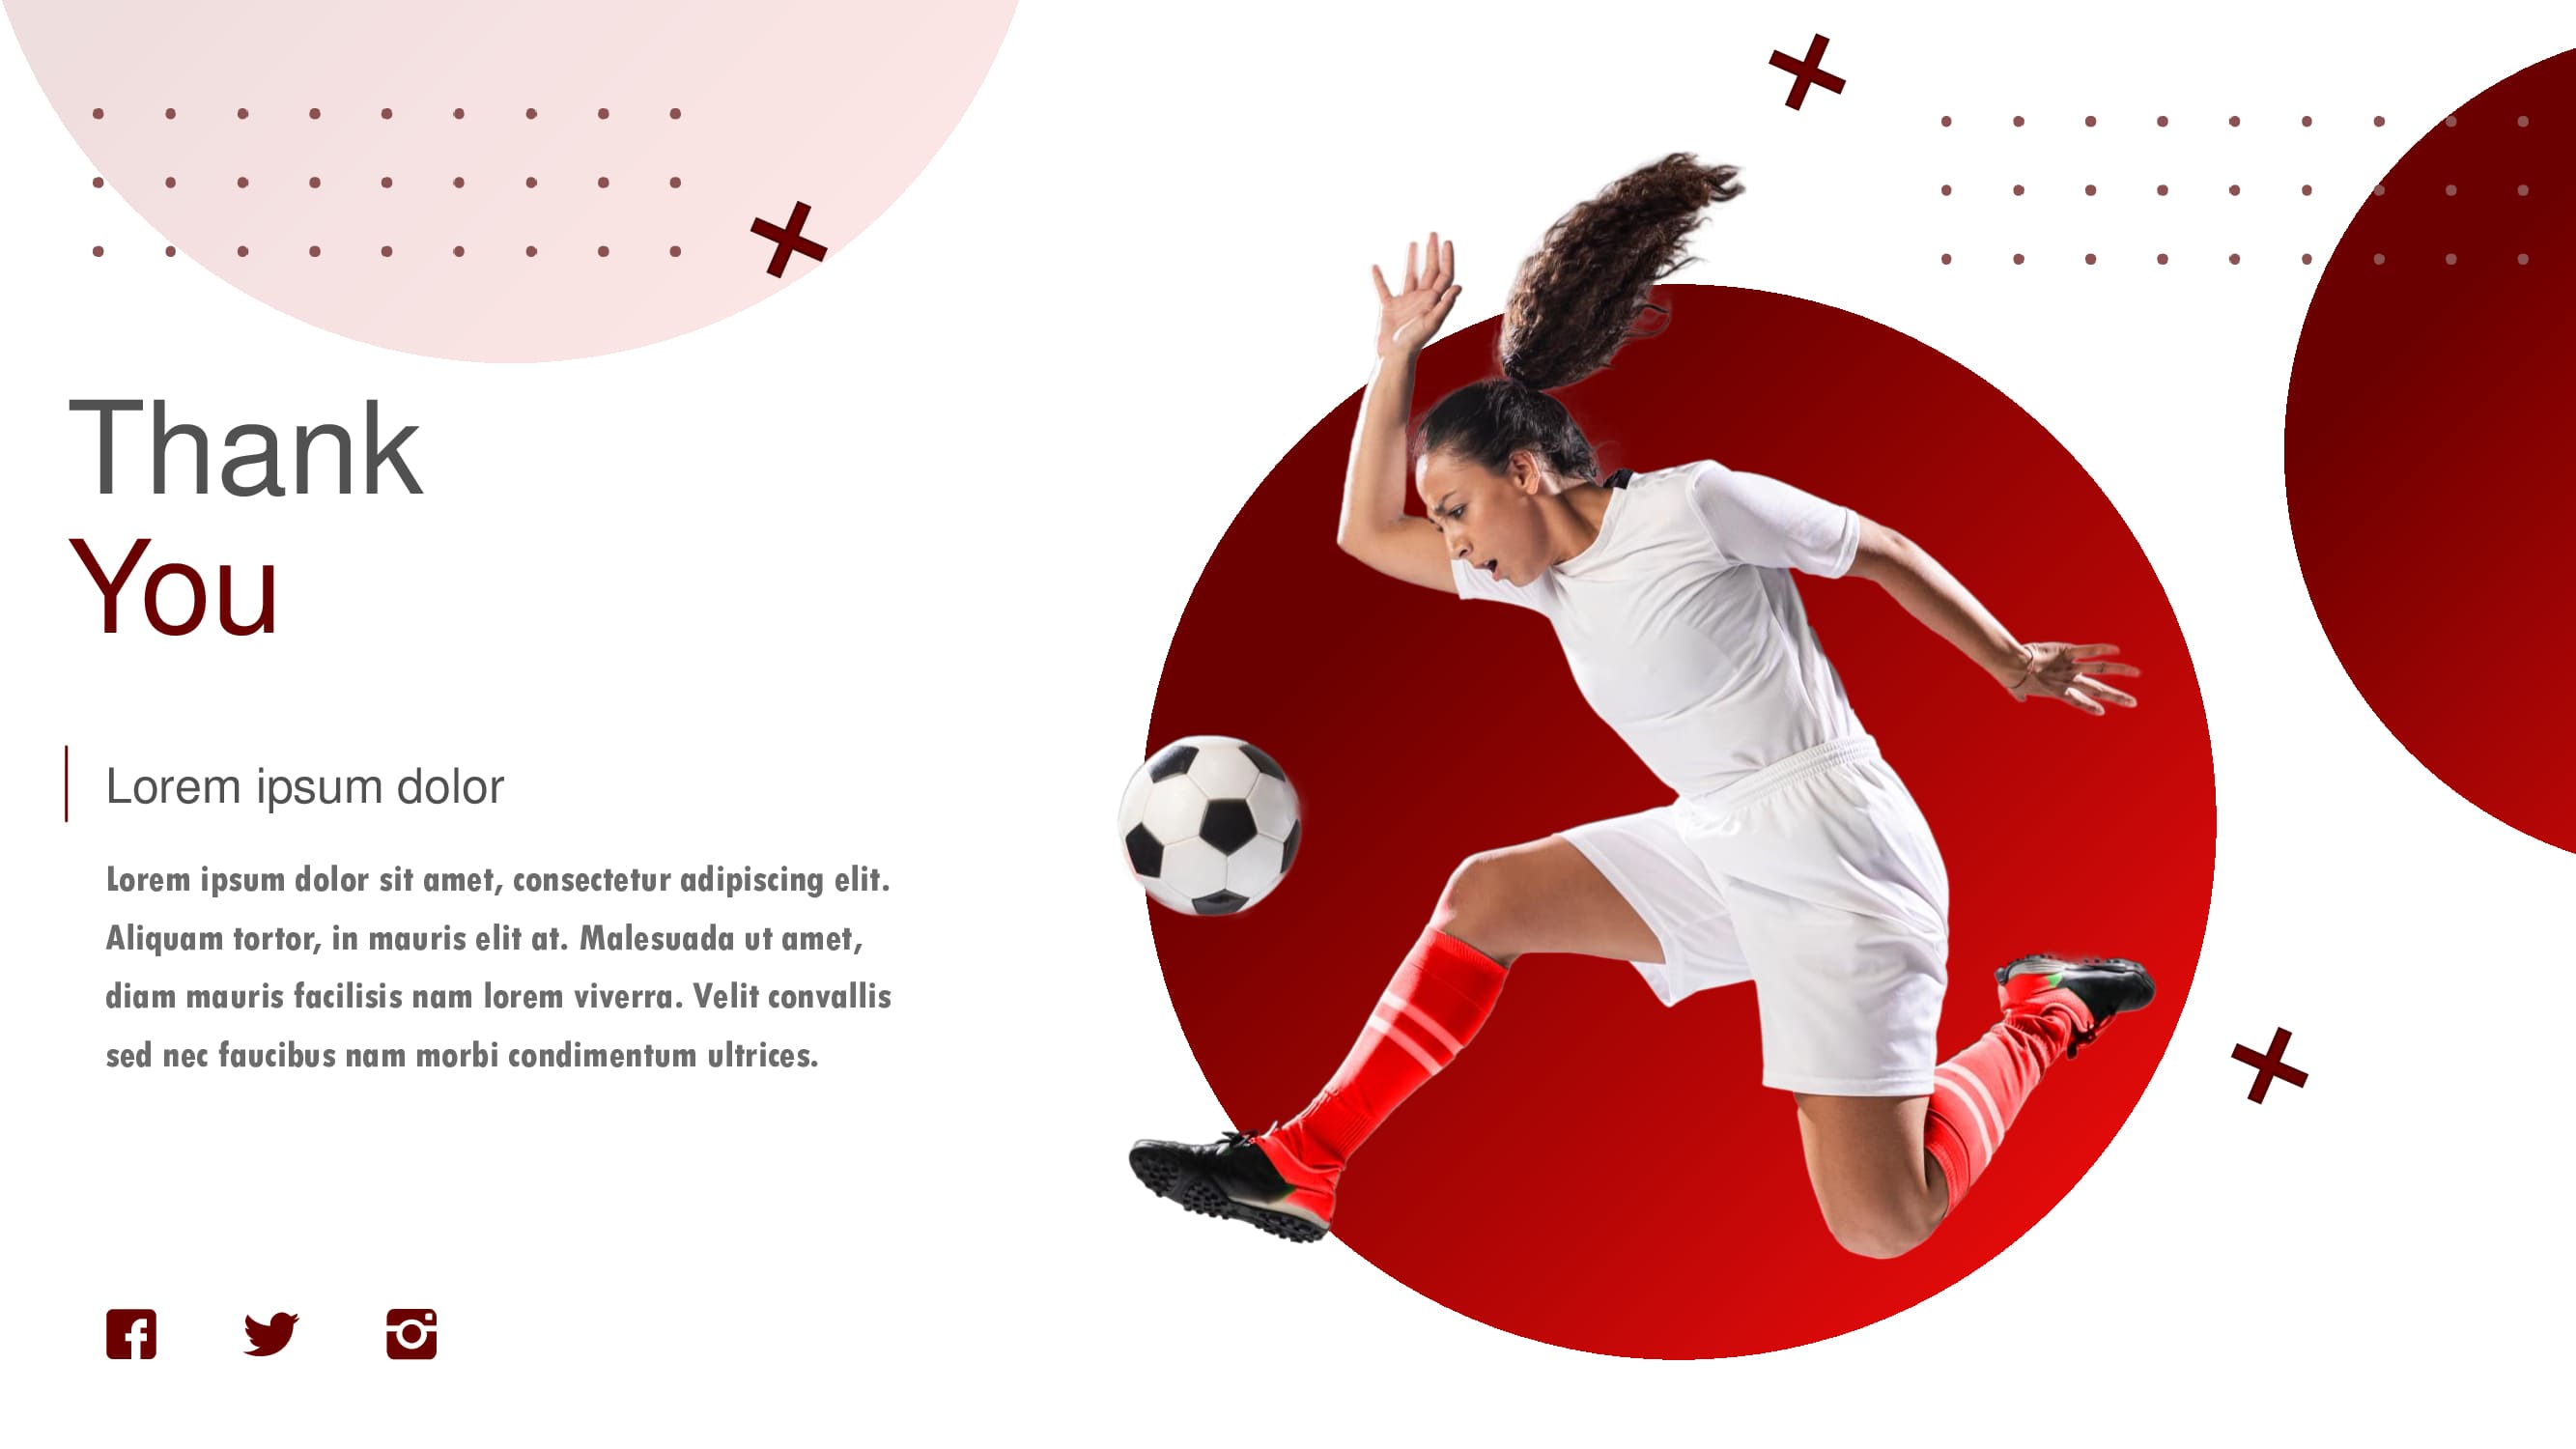 A slide with red lettering "Thank you" and image of a girl with a soccer ball.